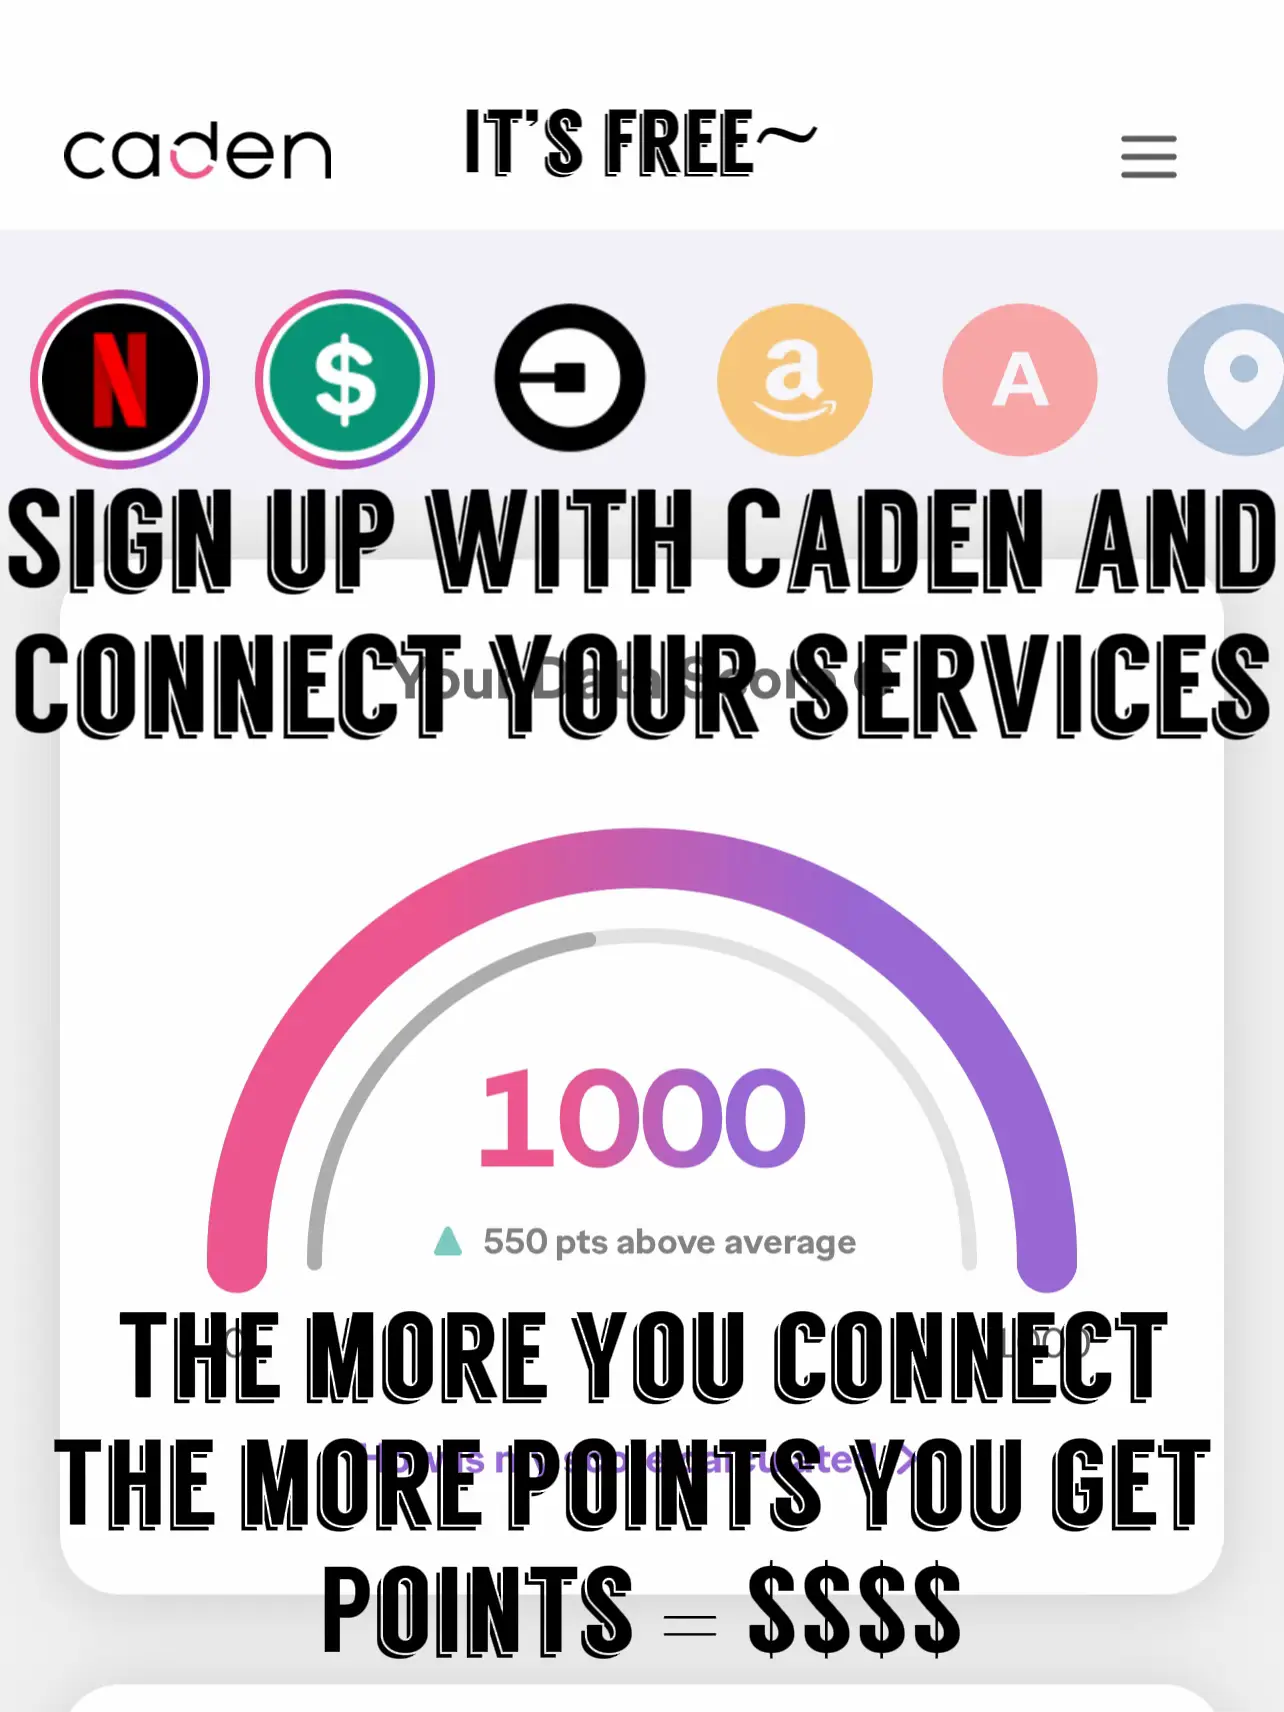  It's free~ sign up with Caden and connect your services